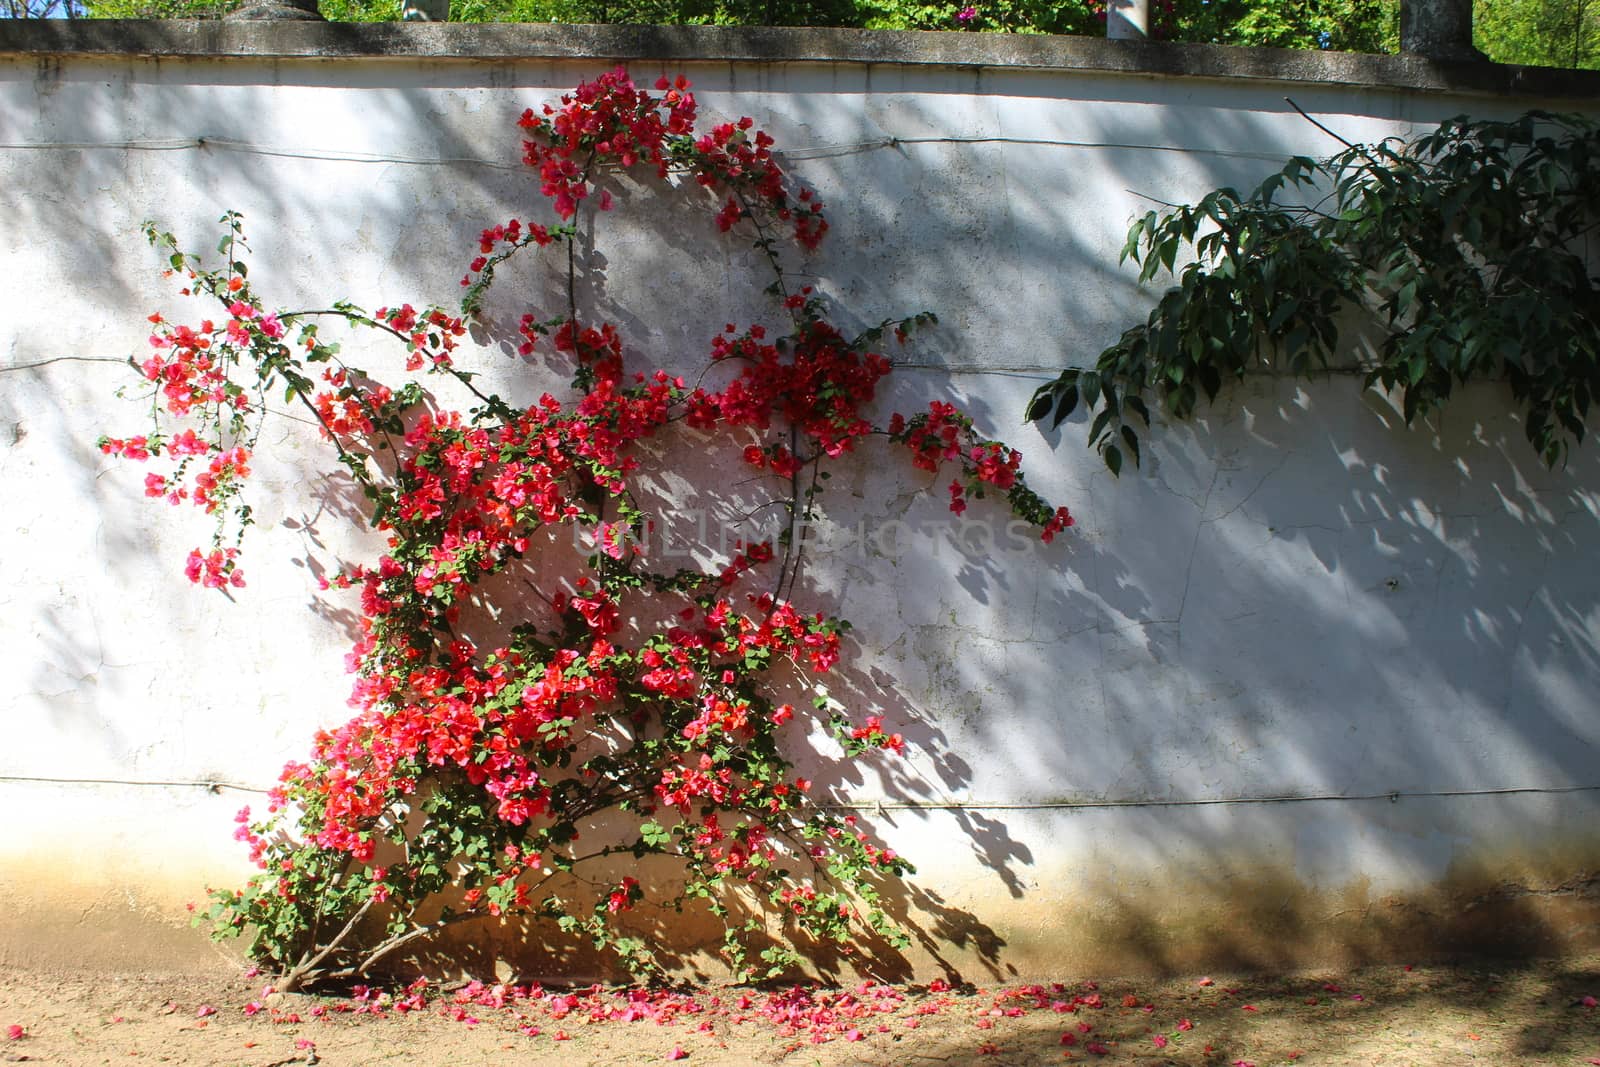 Bougainvillea spectabilis, known as great bougainvillea. Along the white wall. Beja, Portugal.